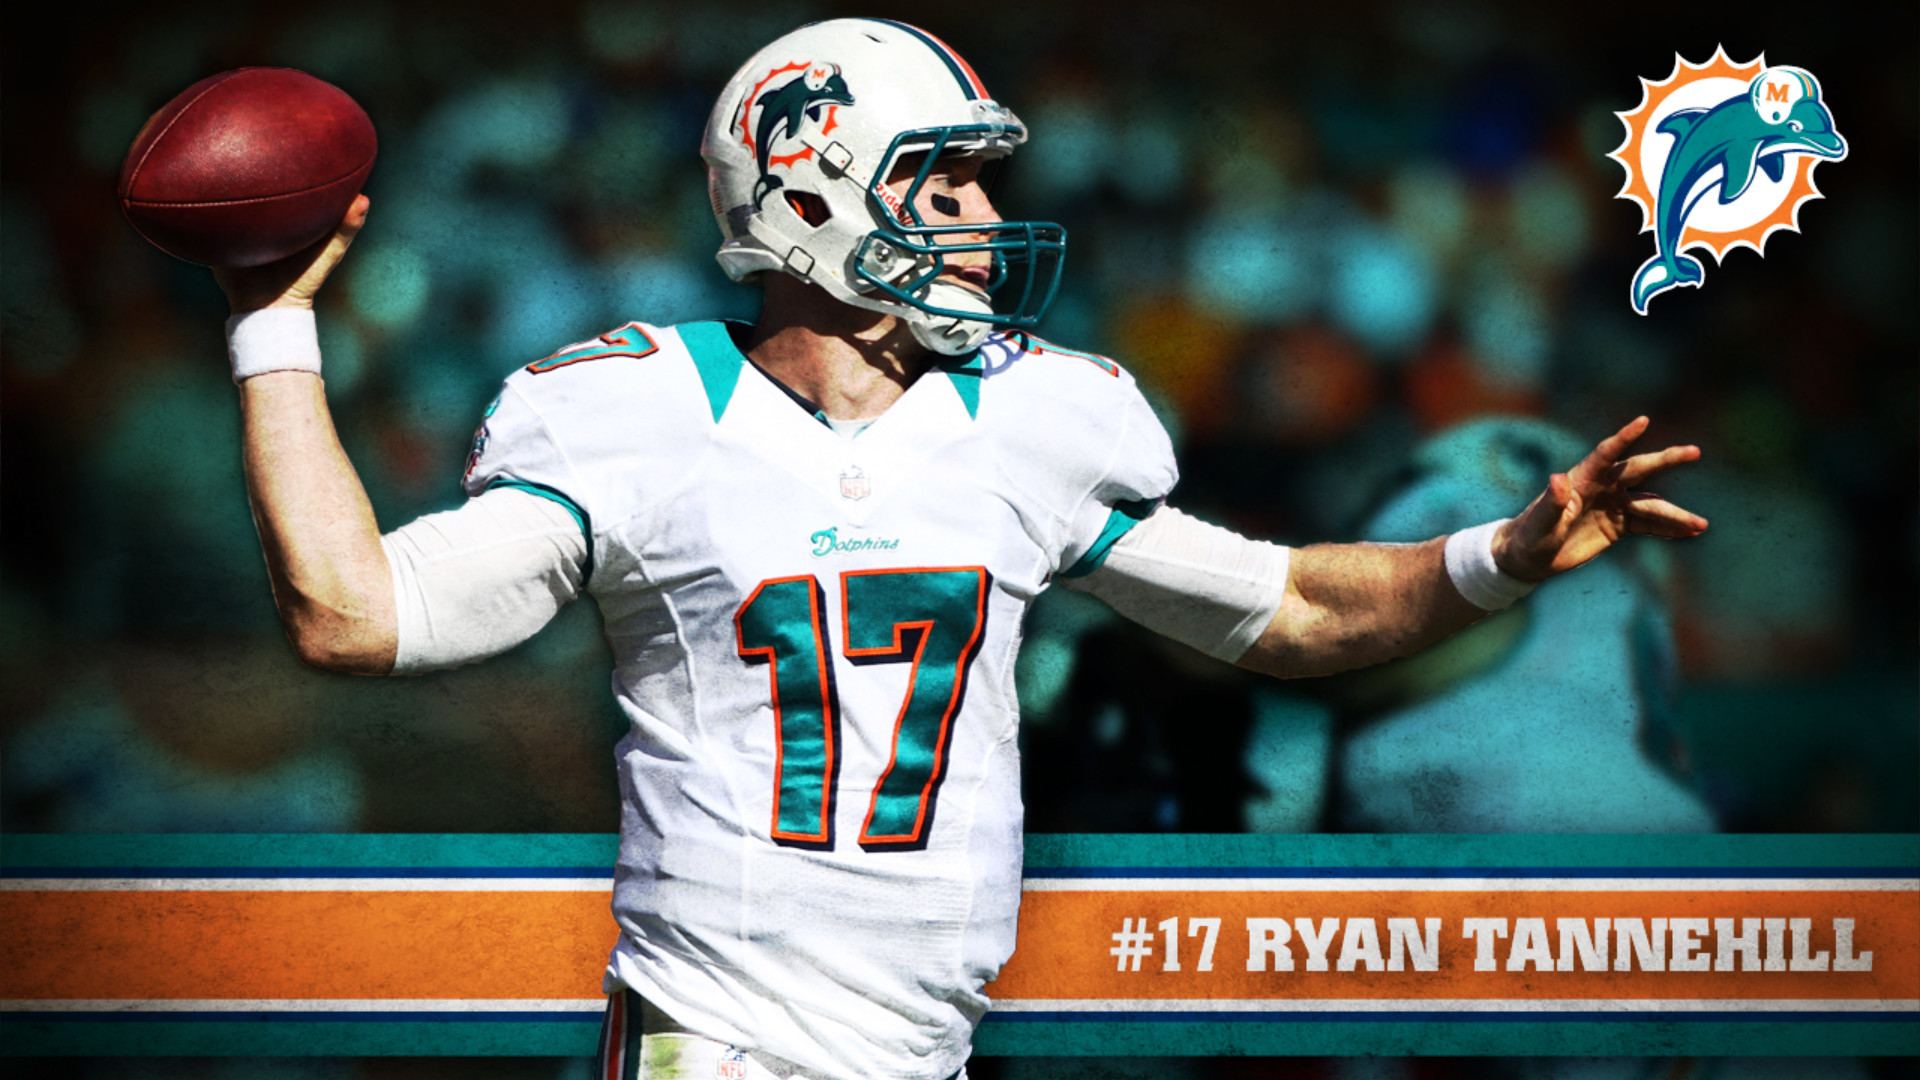 1920x1080 Official Miami Dolphins Android Apps on Google Play 640Ã960 Free Miami  Dolphins Wallpapers (